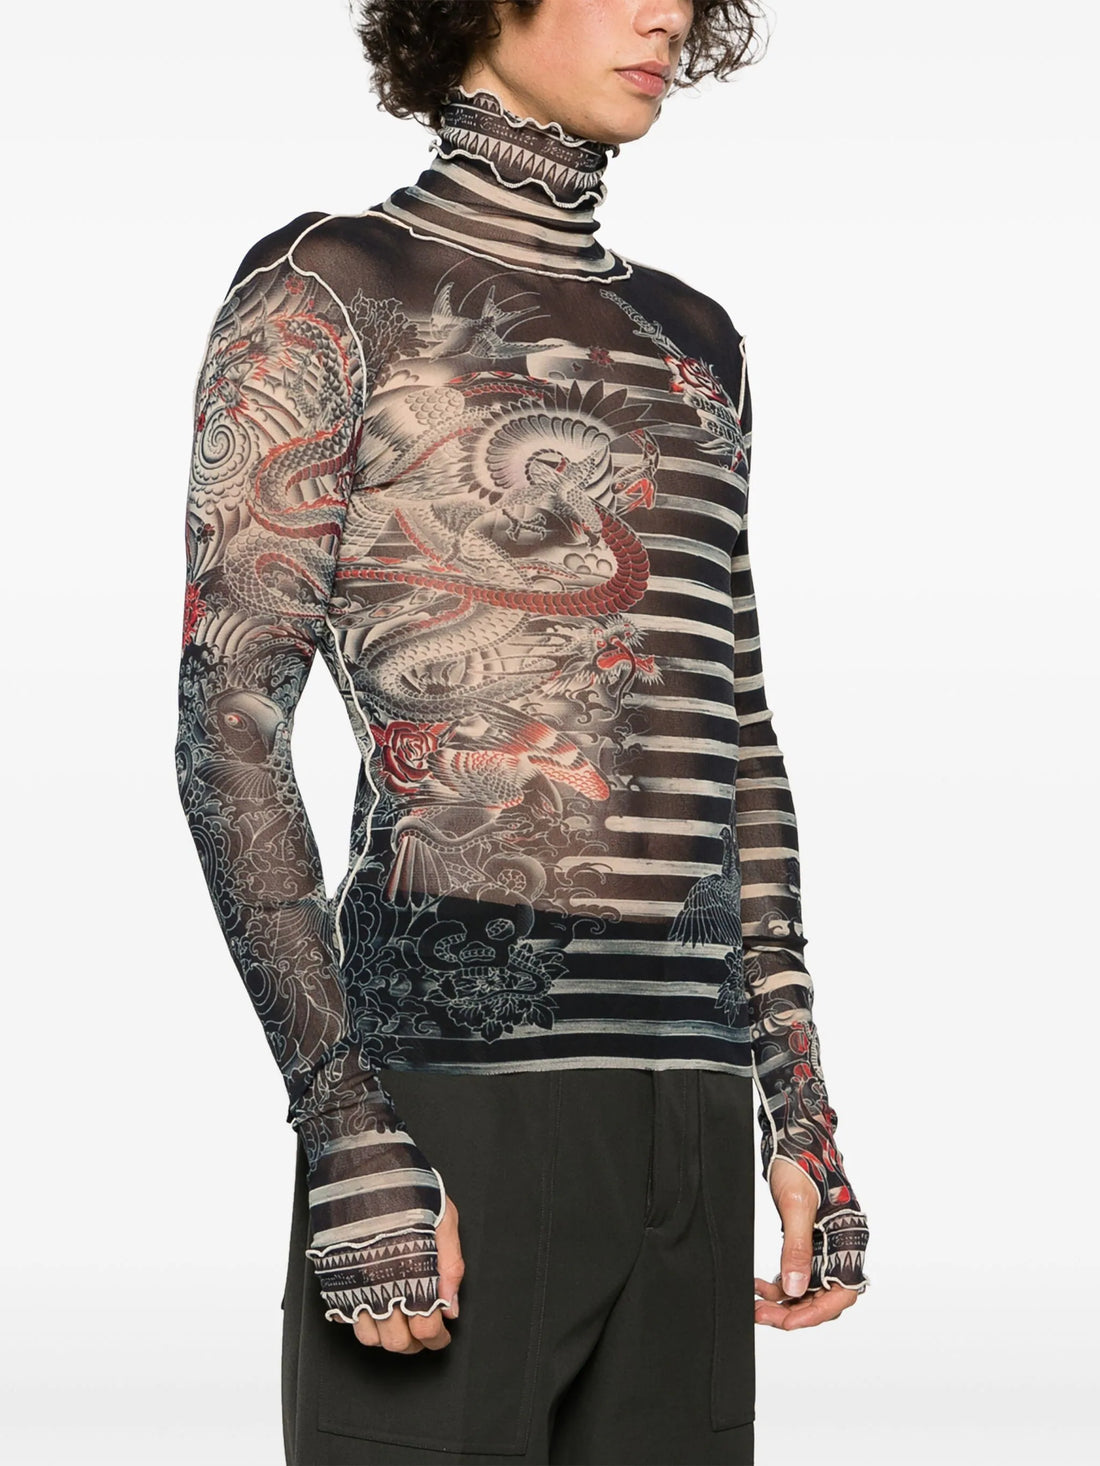 JEAN PAUL GAULTIER UNISEX Graphic Printed Long Sleeves Top Navy/Blue/White - MAISONDEFASHION.COM